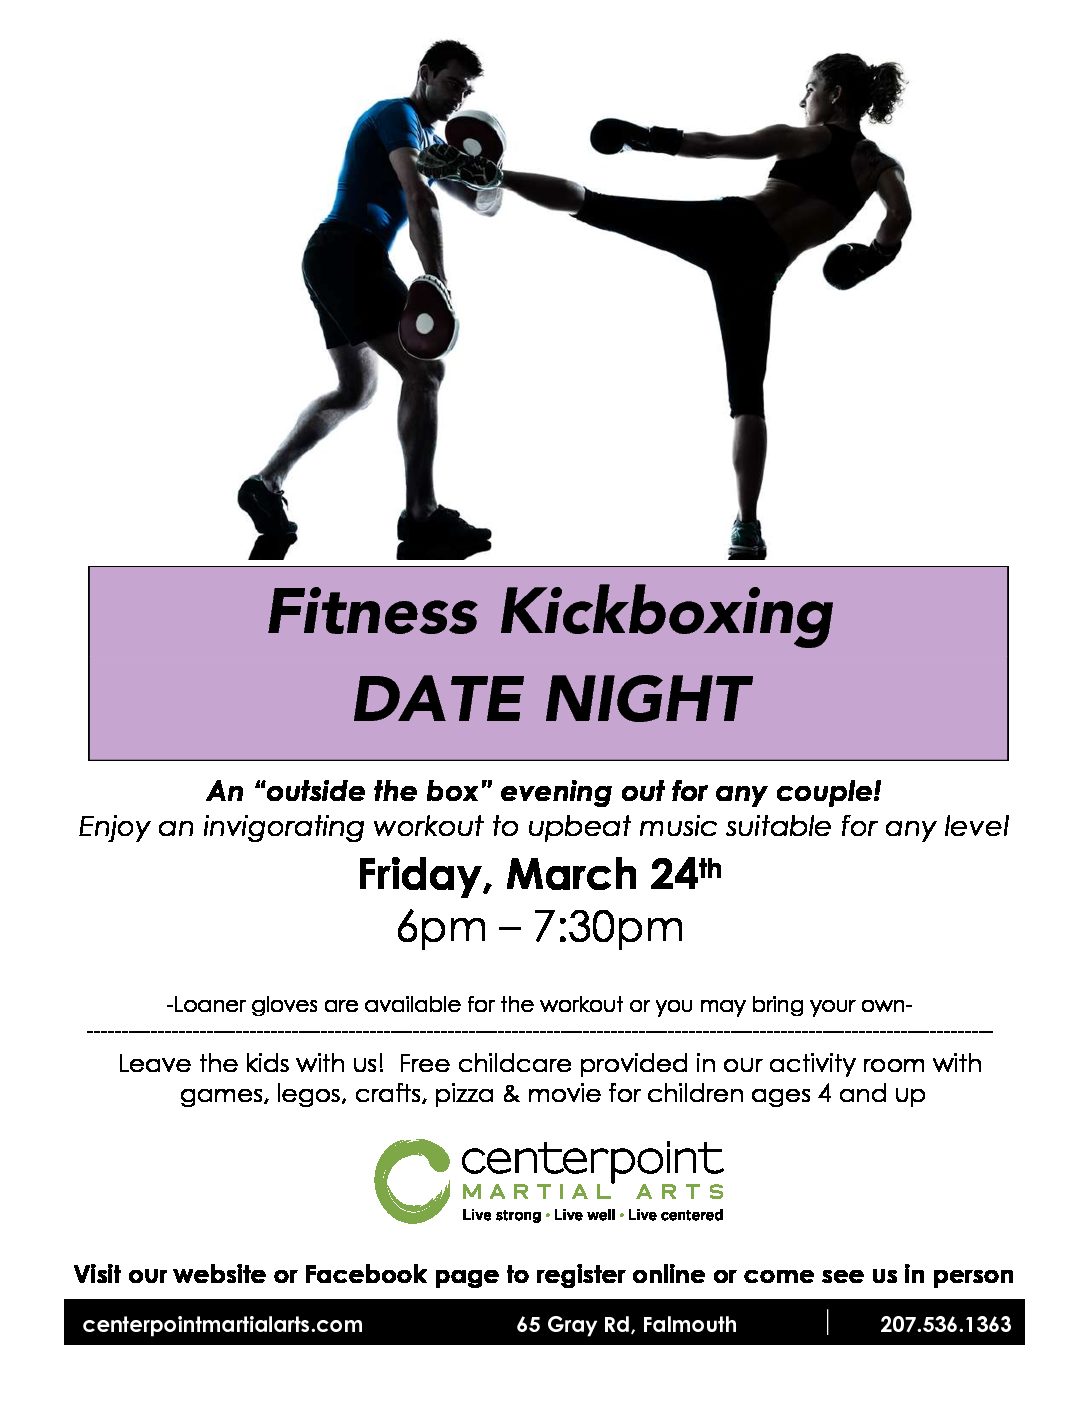 Fitness Kickboxing DATE NIGHT March 24th Centerpoint